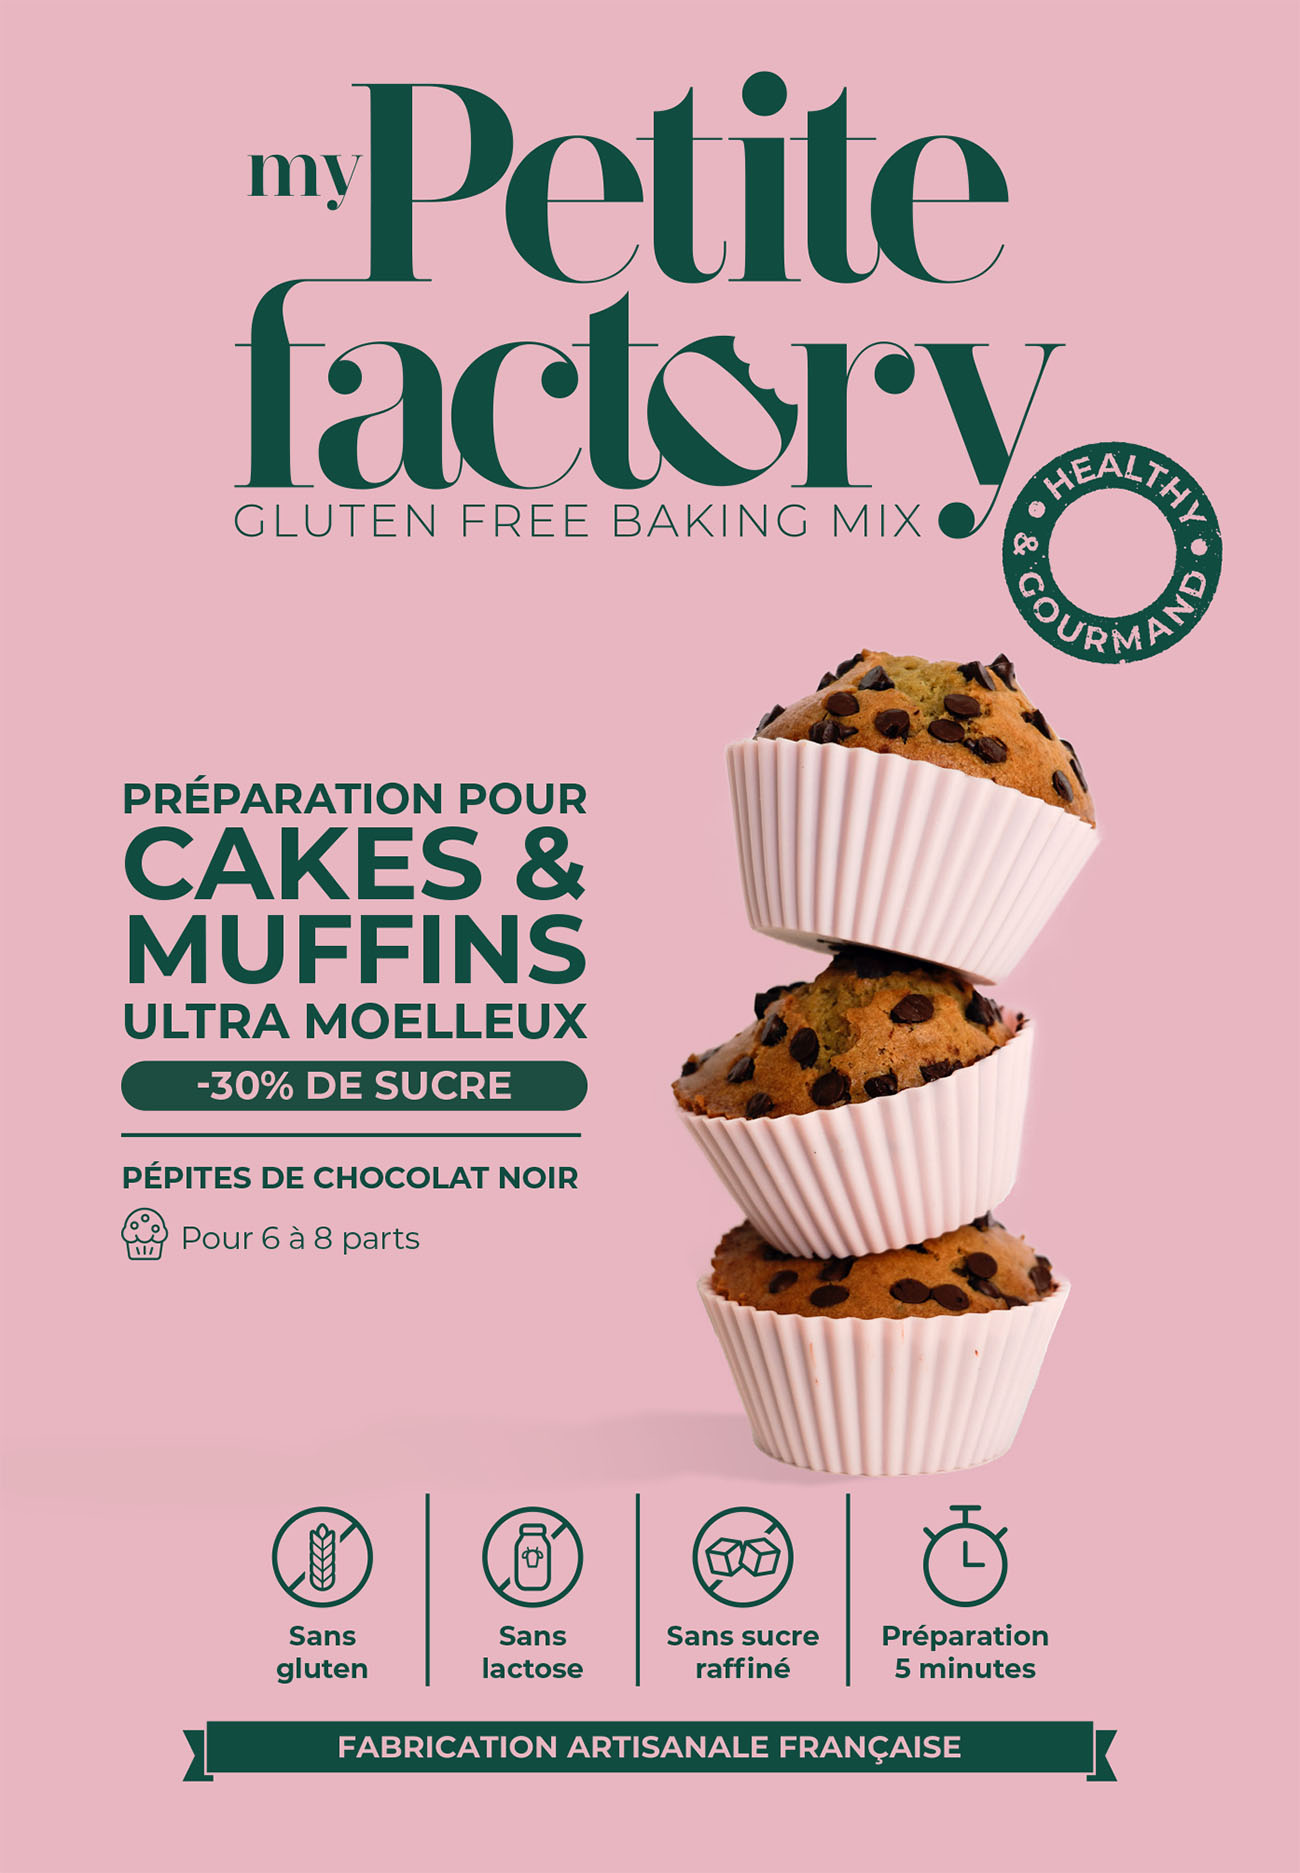 MY-PETITE-FACTORY-healthy-gourmand-cakes-muffins